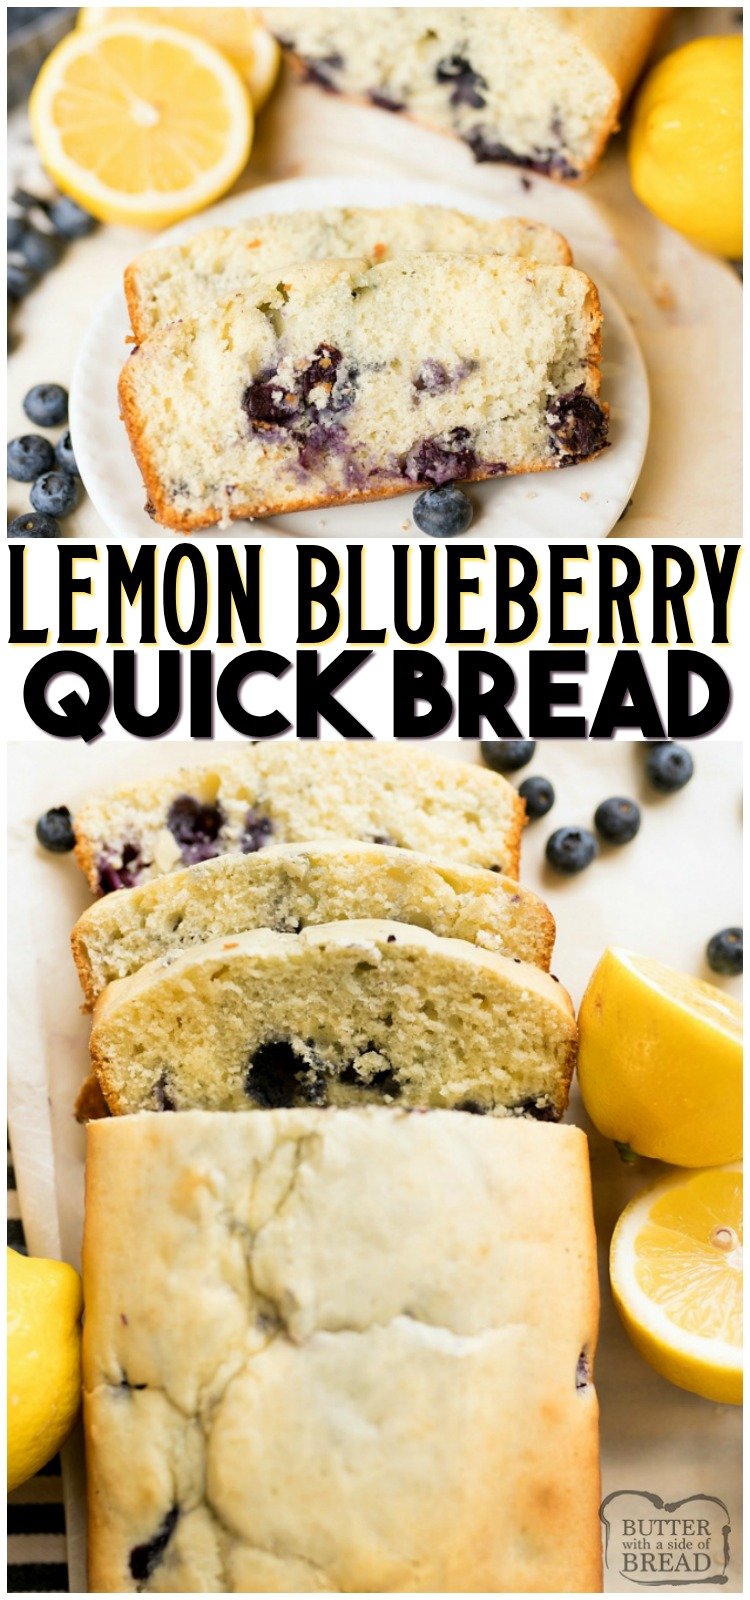 Lemon Blueberry Quick Bread is a deliciously moist and fresh quick bread recipe loaded with blueberries and bright lemon flavor. The quick bread is the perfect addition to any brunch menu! #lemon #blueberry #quickbread #bread #baking #brunch #recipe from BUTTER WITH A SIDE OF BREAD